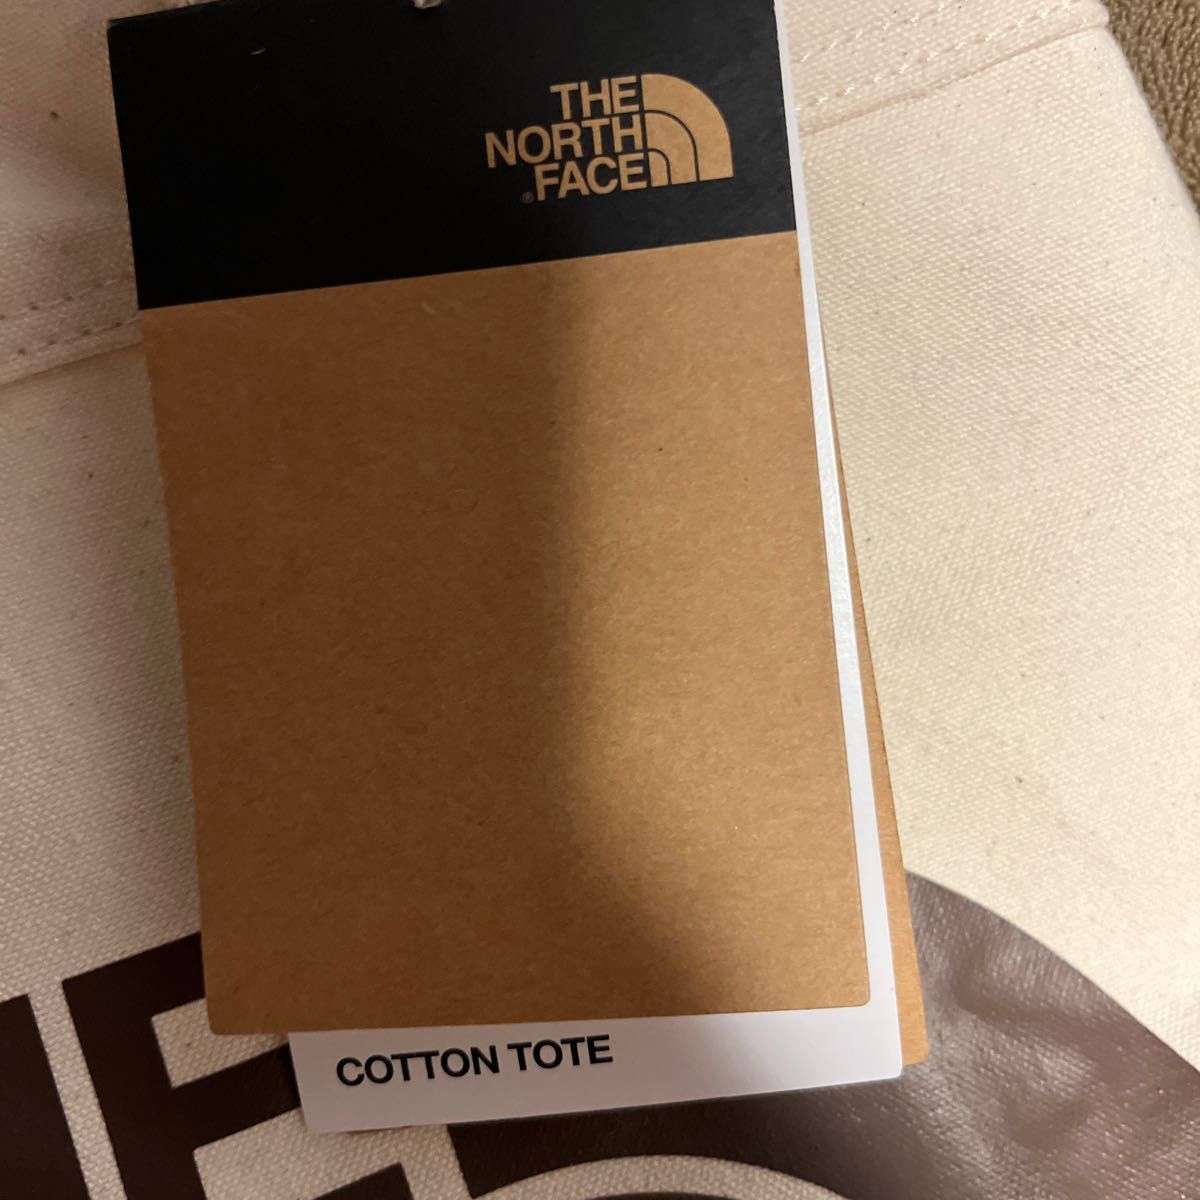 THE NORTH FACE ザノースフェイス トートバッグCOTTON TOTE